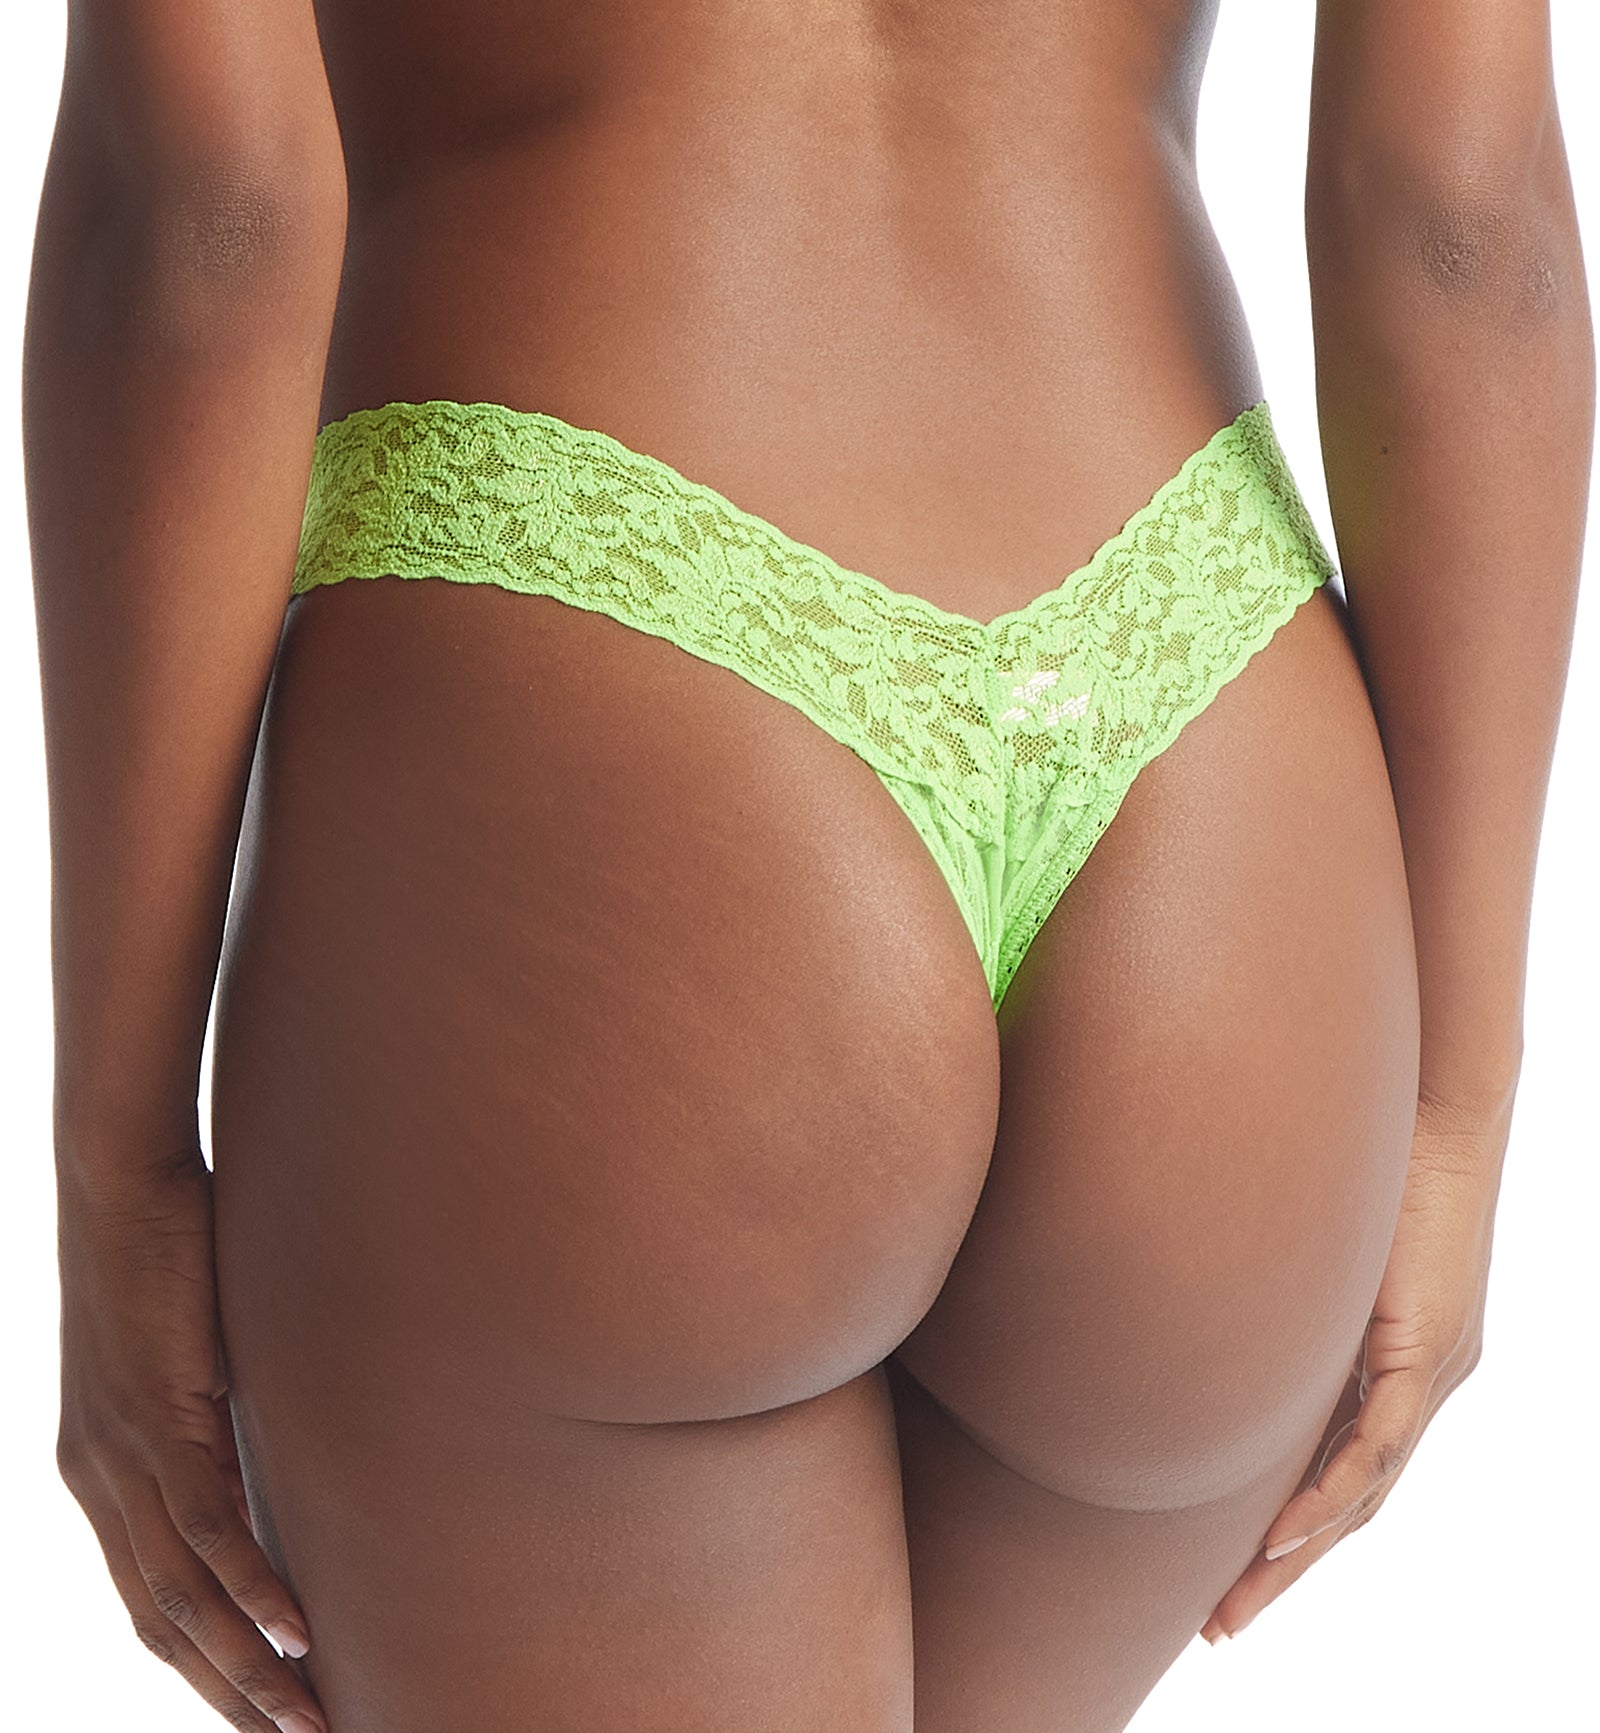 Hanky Panky Signature Lace Low Rise Thong (4911P),Lush Green - Lush Green,One Size